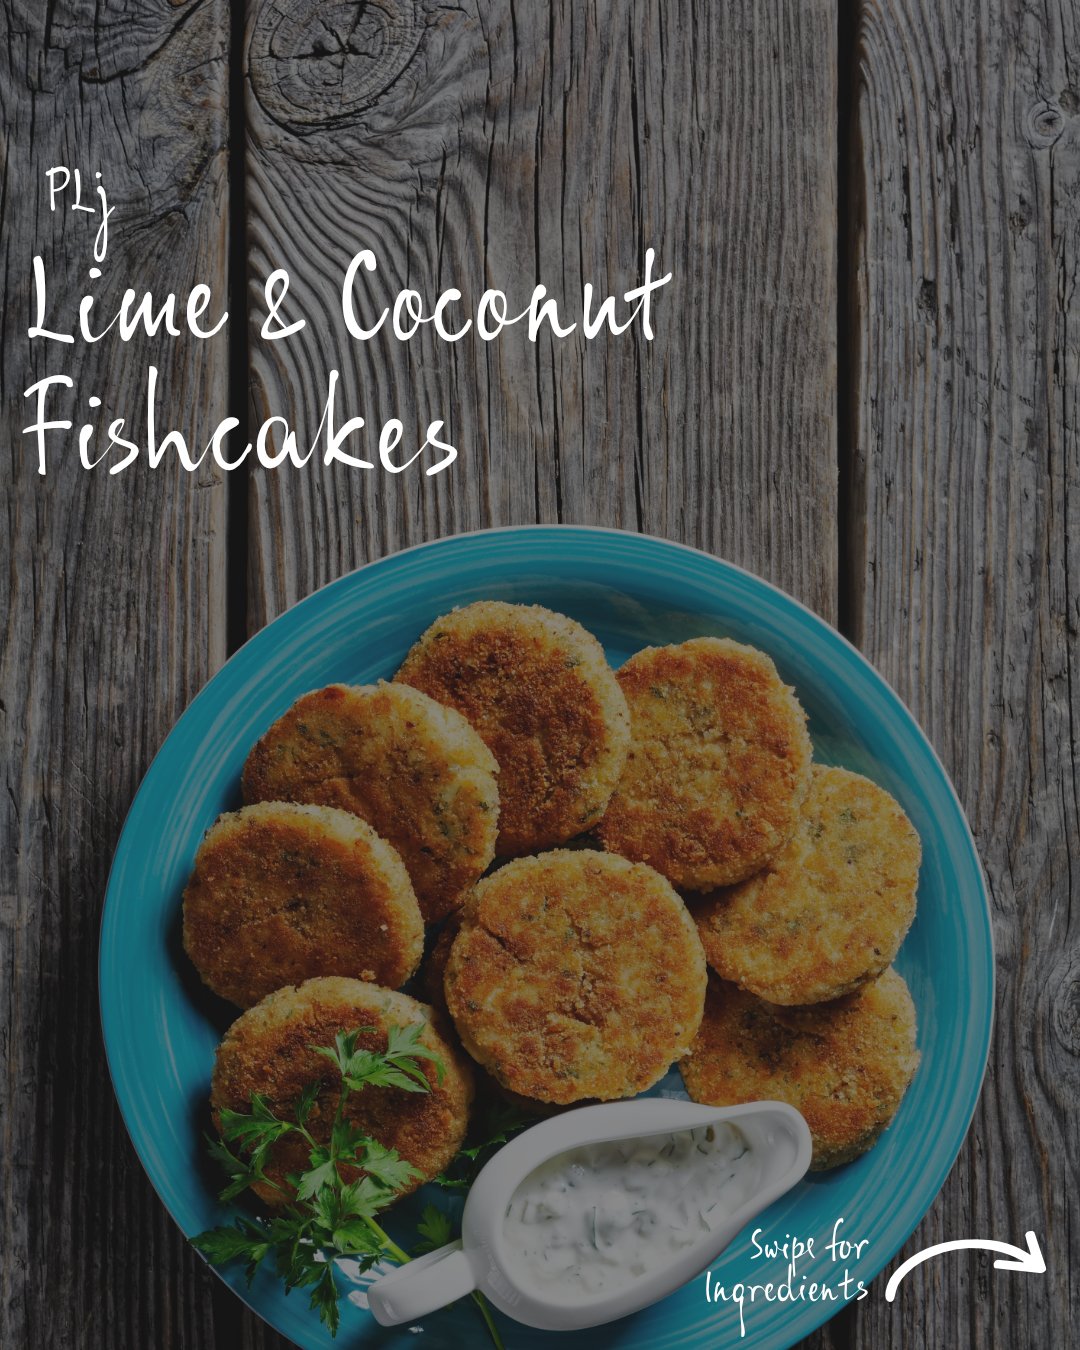 Let's be honest, who doesn't like a fishcake?

This recipe combines the zest of PLj Lime and the coolness of a coconut to bring a beautifully balanced flavour to your plate.